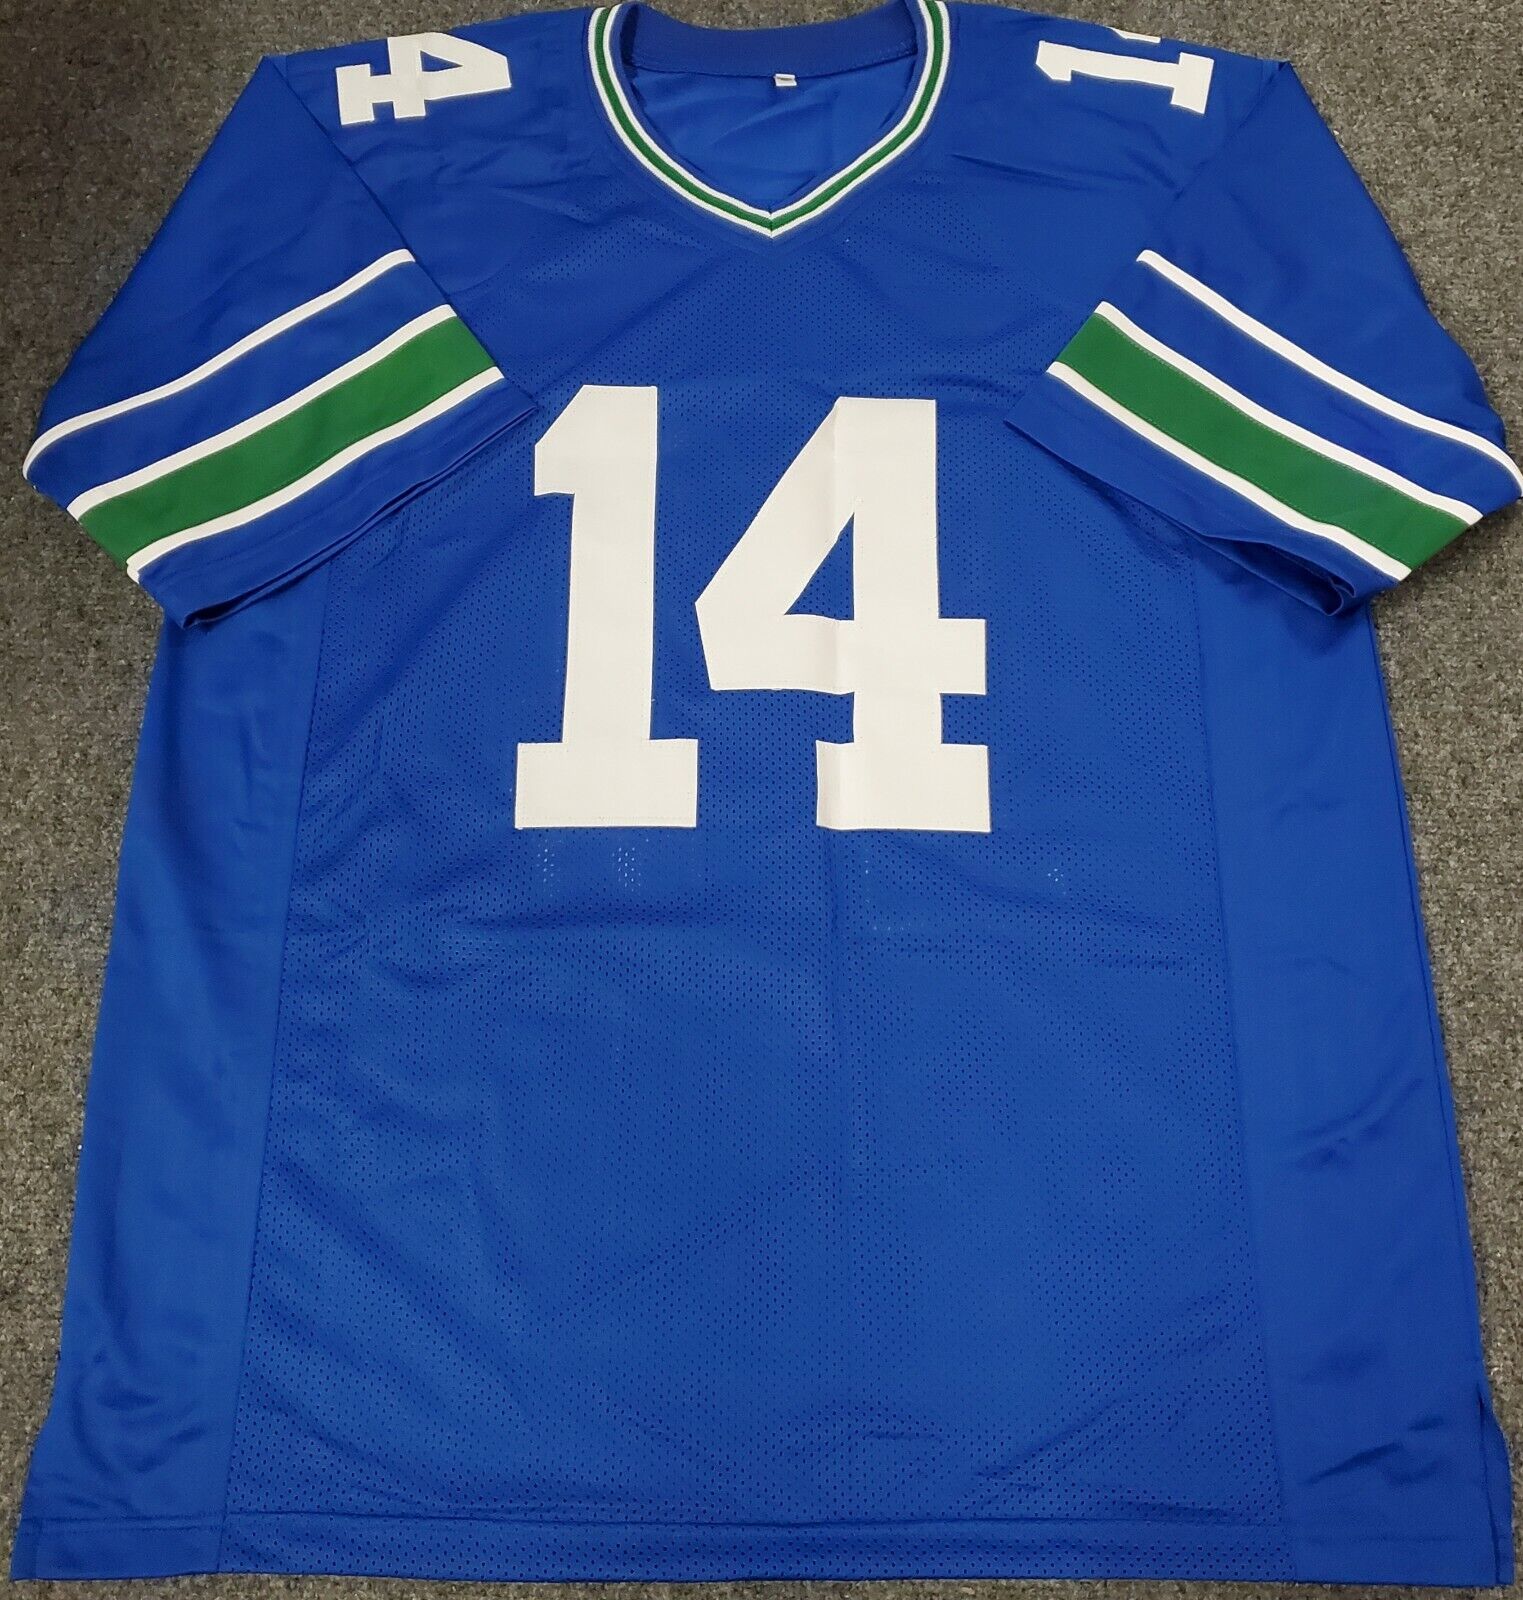 MVP Authentics Seattle Seahawks Dk Metcalf Autographed Signed Throwback Jersey Jsa Coa 179.10 sports jersey framing , jersey framing